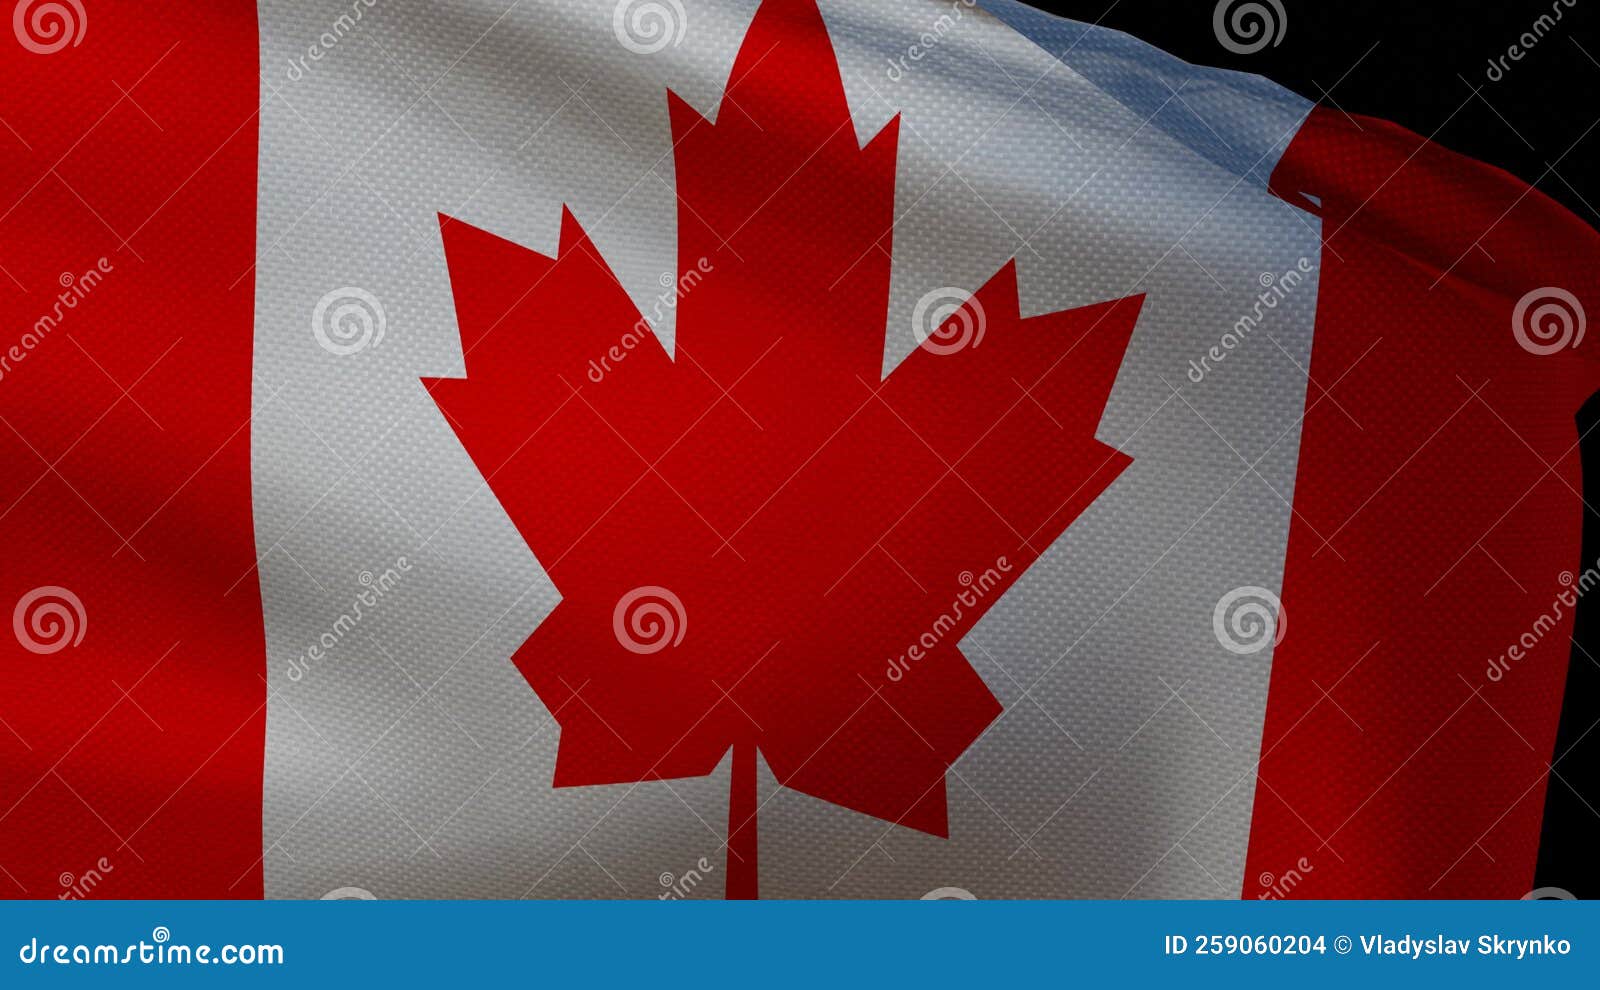 Animated 3d Flag Canada Stock Footage & Videos - 42 Stock Videos